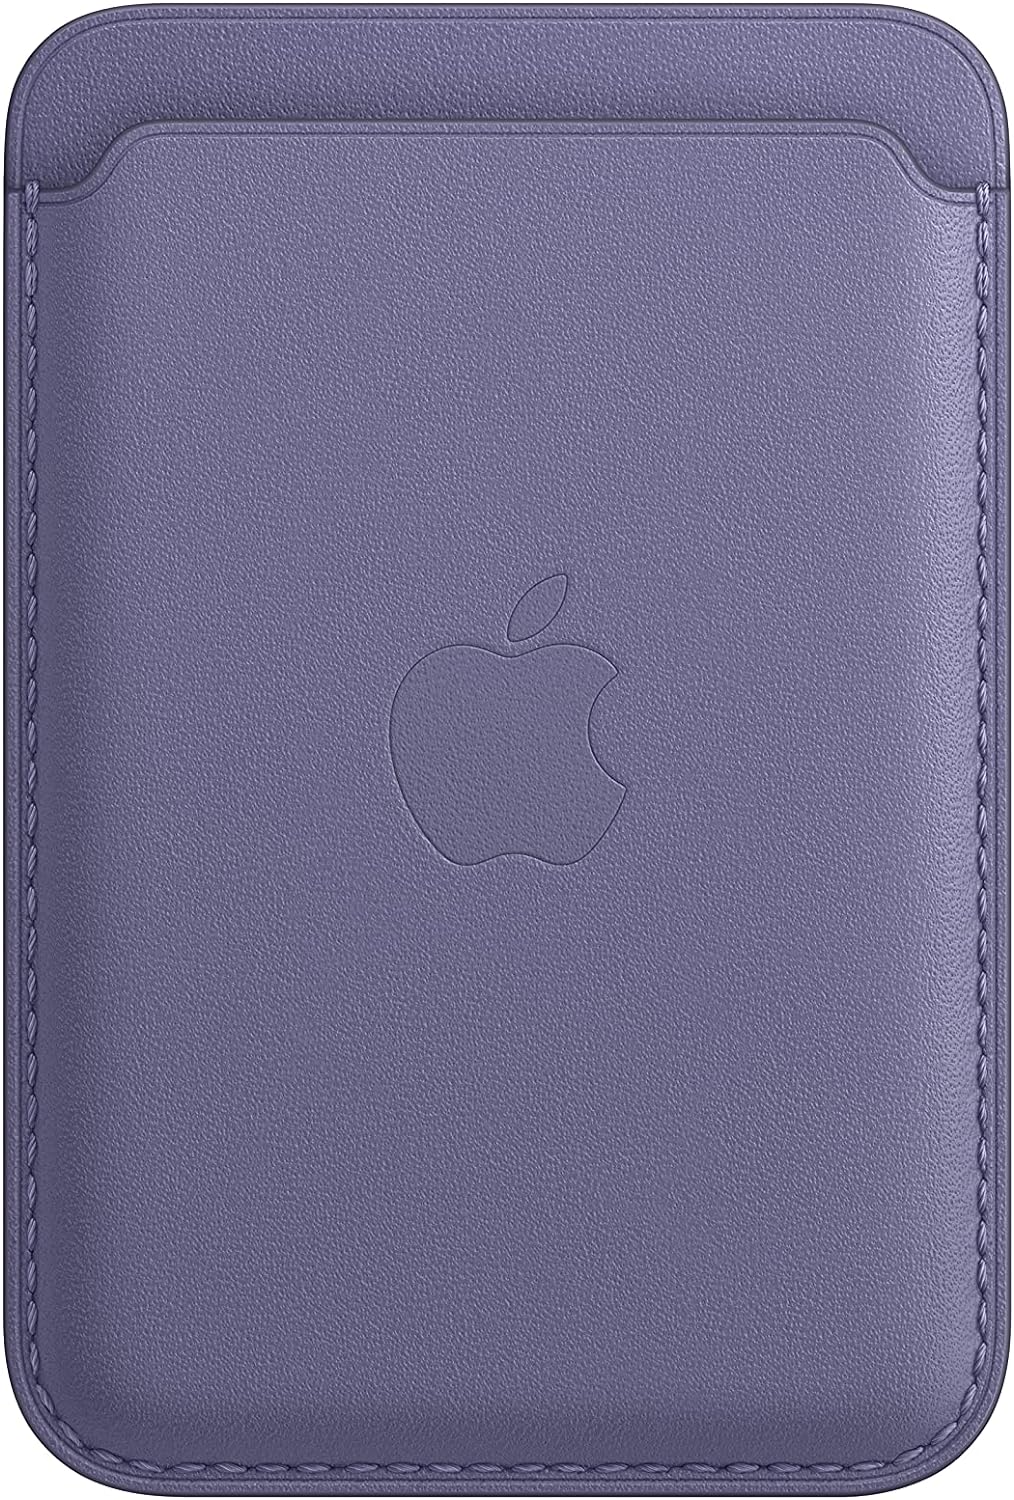 Genuine Apple Leather Wallet with MagSafe (for iPhone) - Wisteria